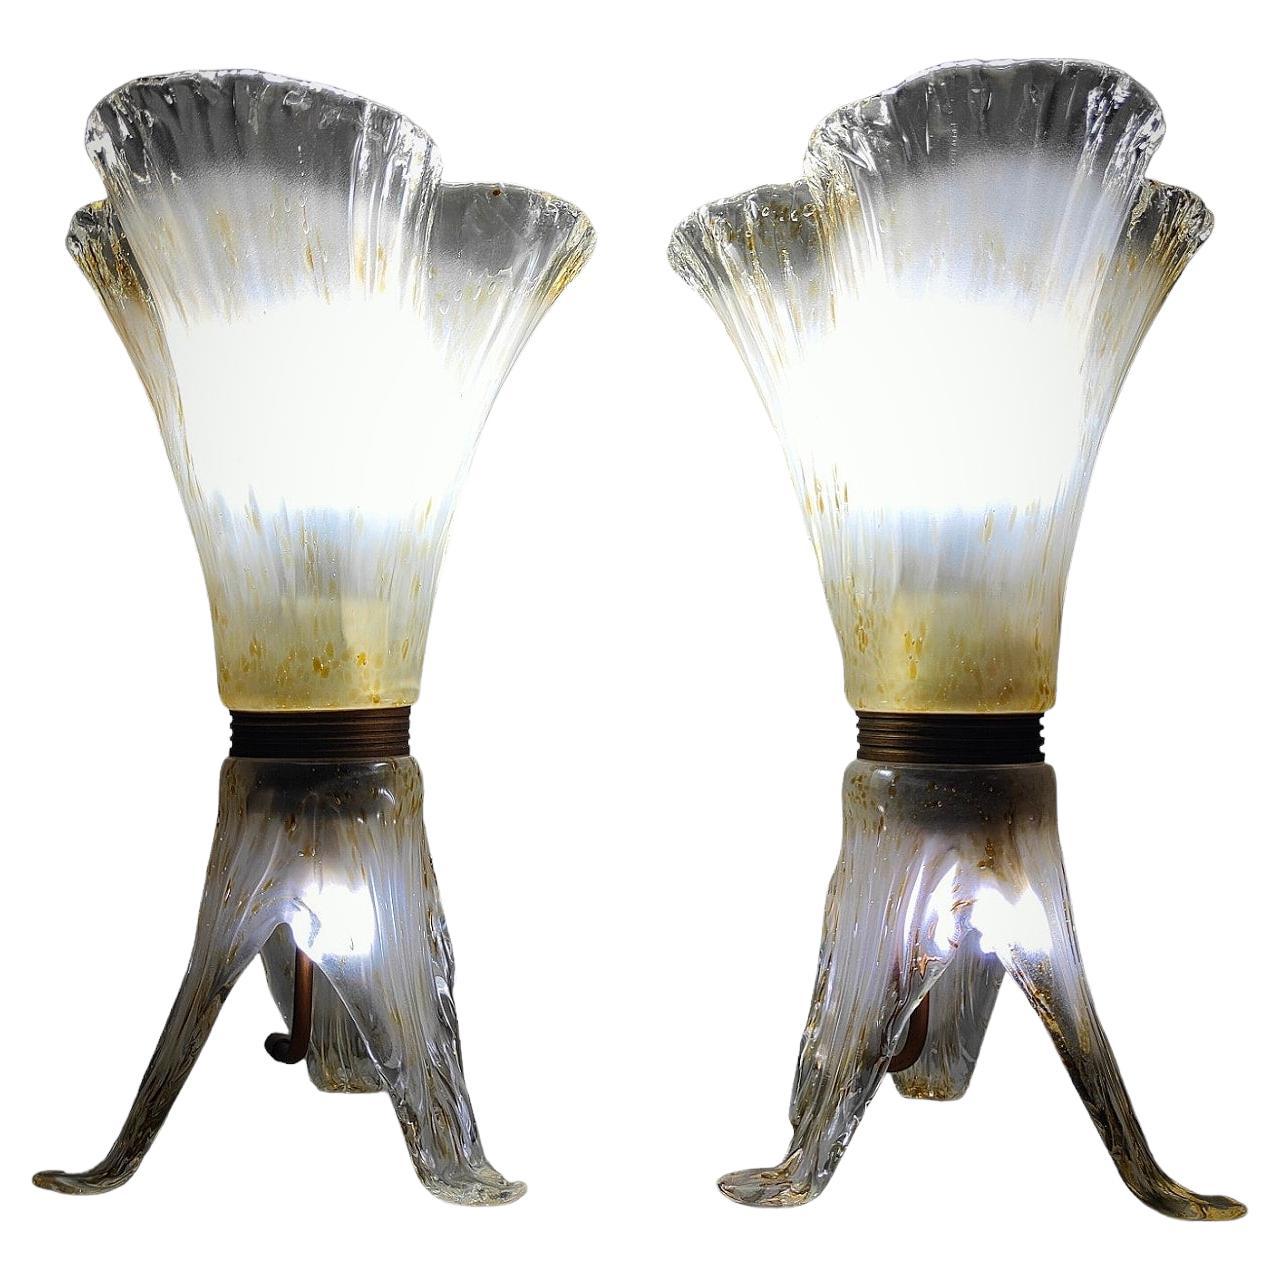 Elegant Pair of Murano Glass Table Lamps - 1970s For Sale